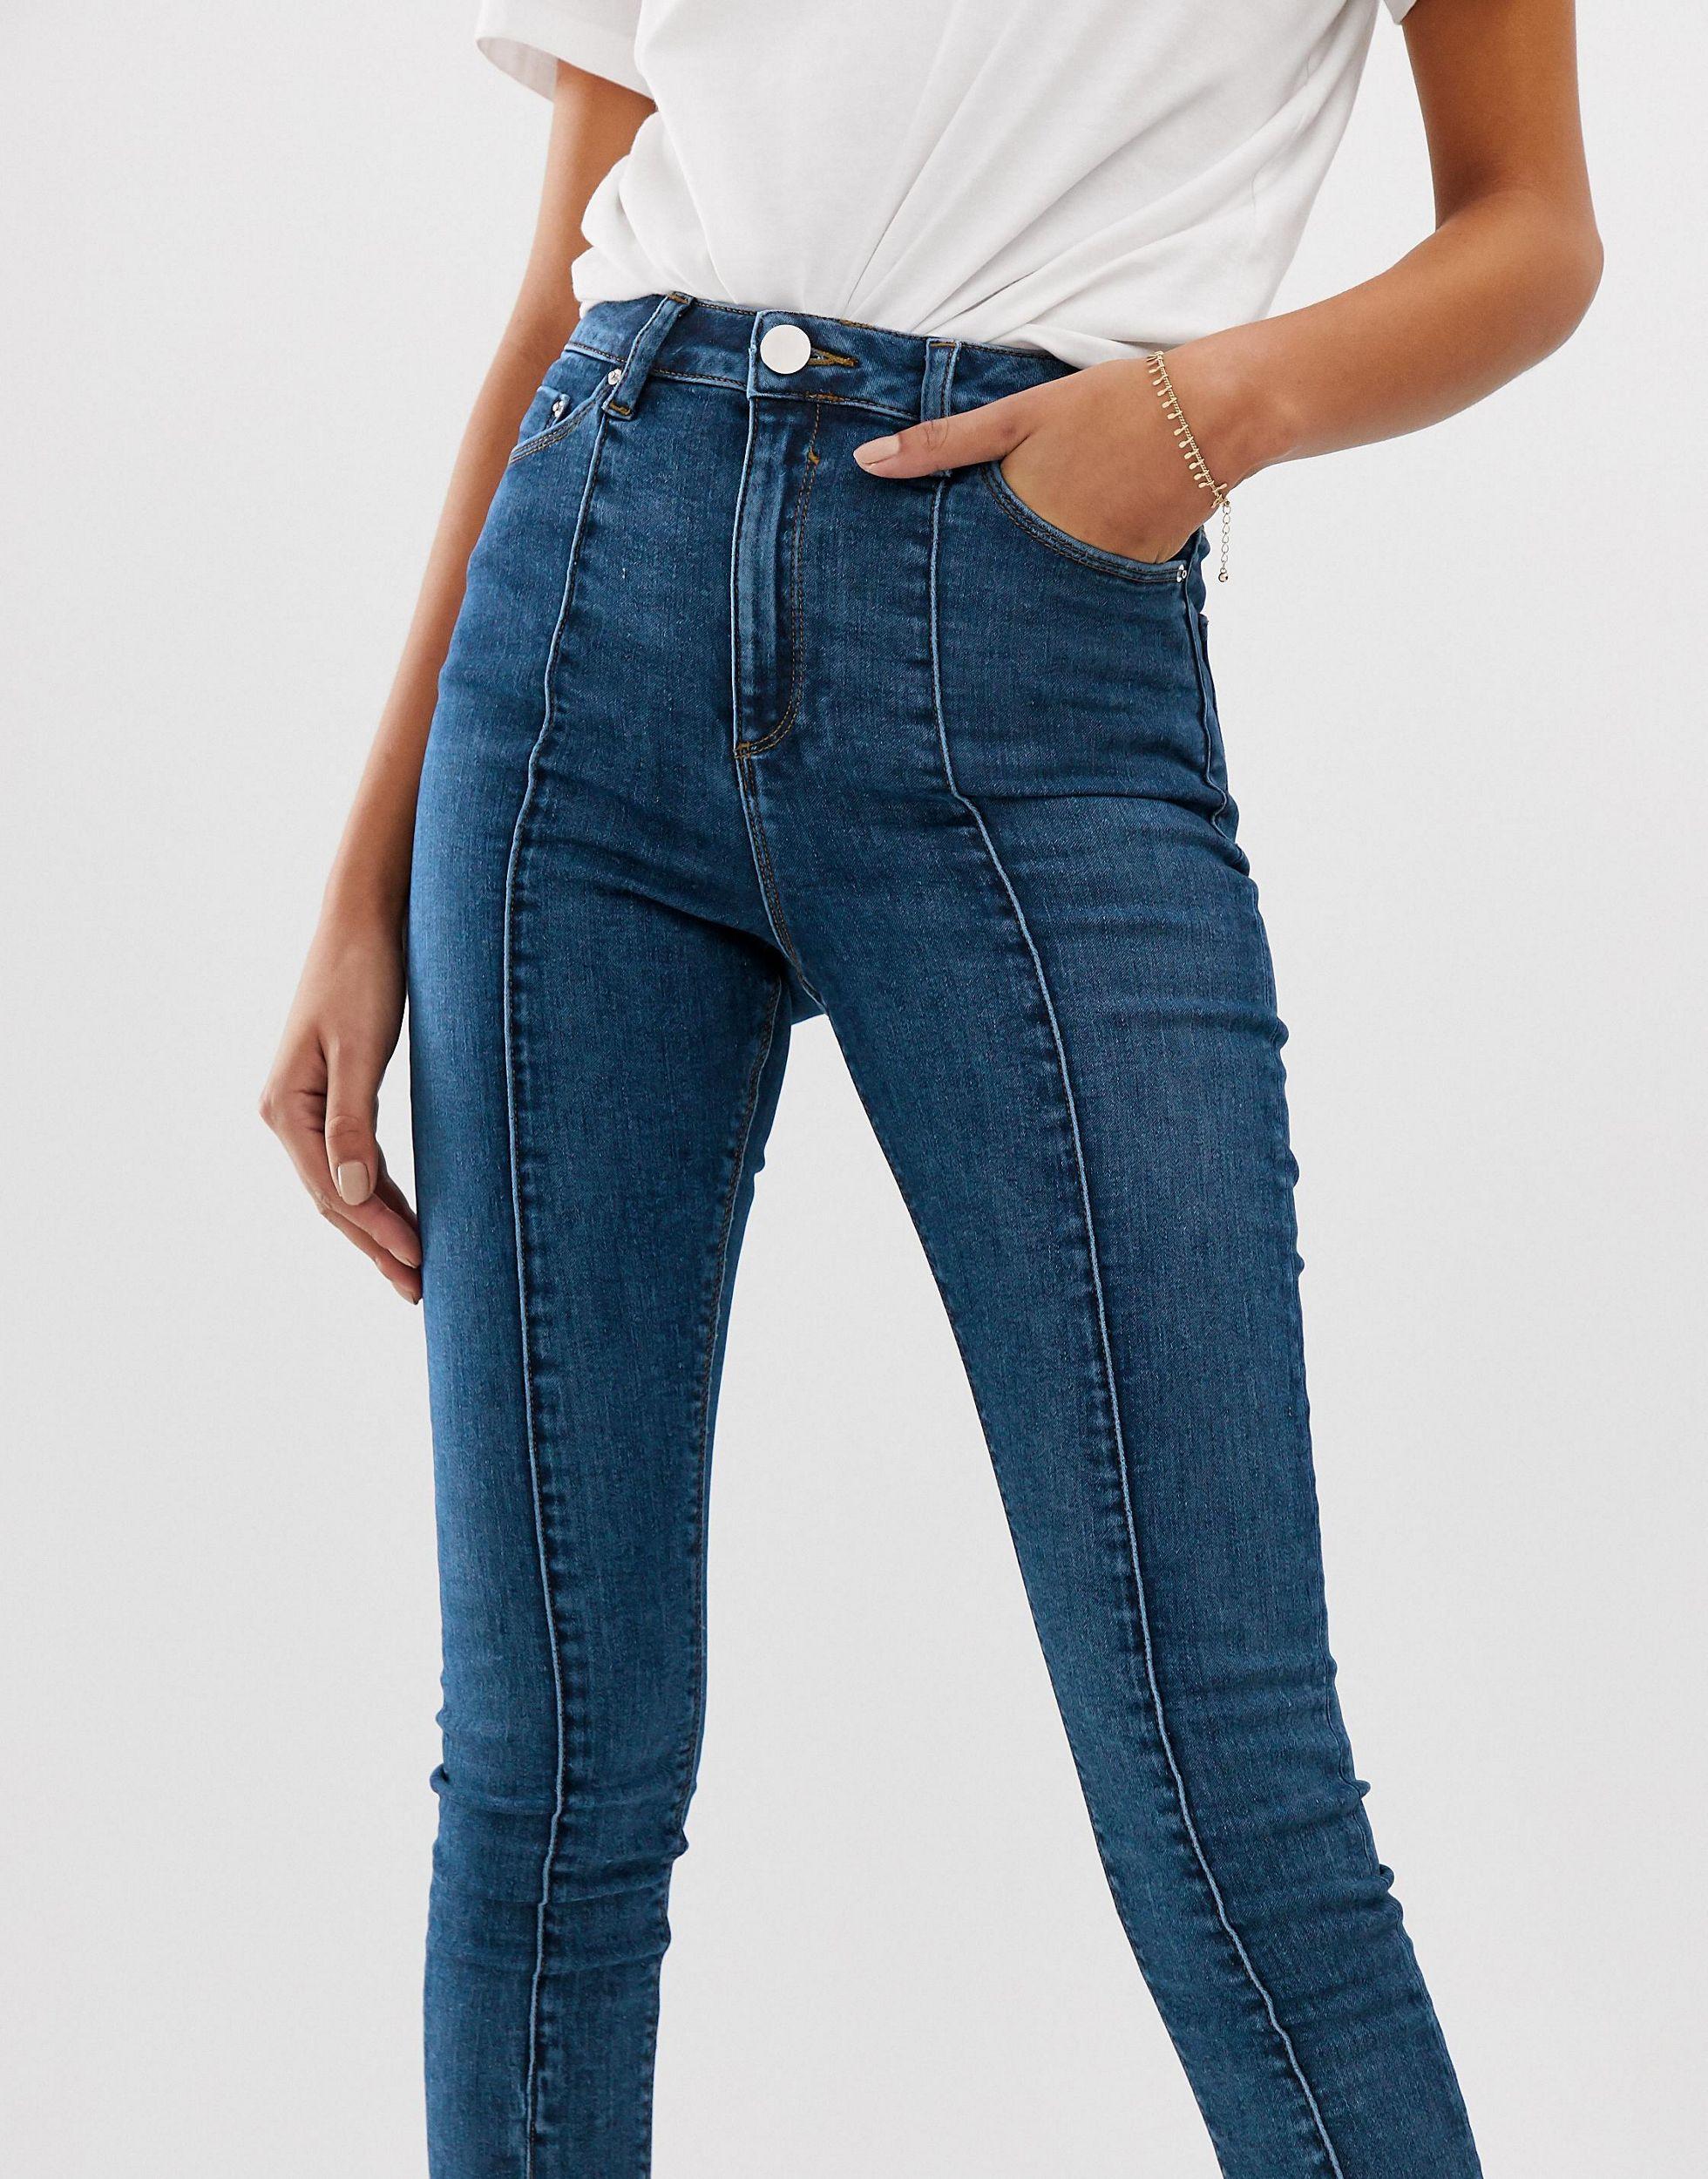 Asos Denim Ridley High Waisted Skinny Jeans In Mid Wash Blue With Front